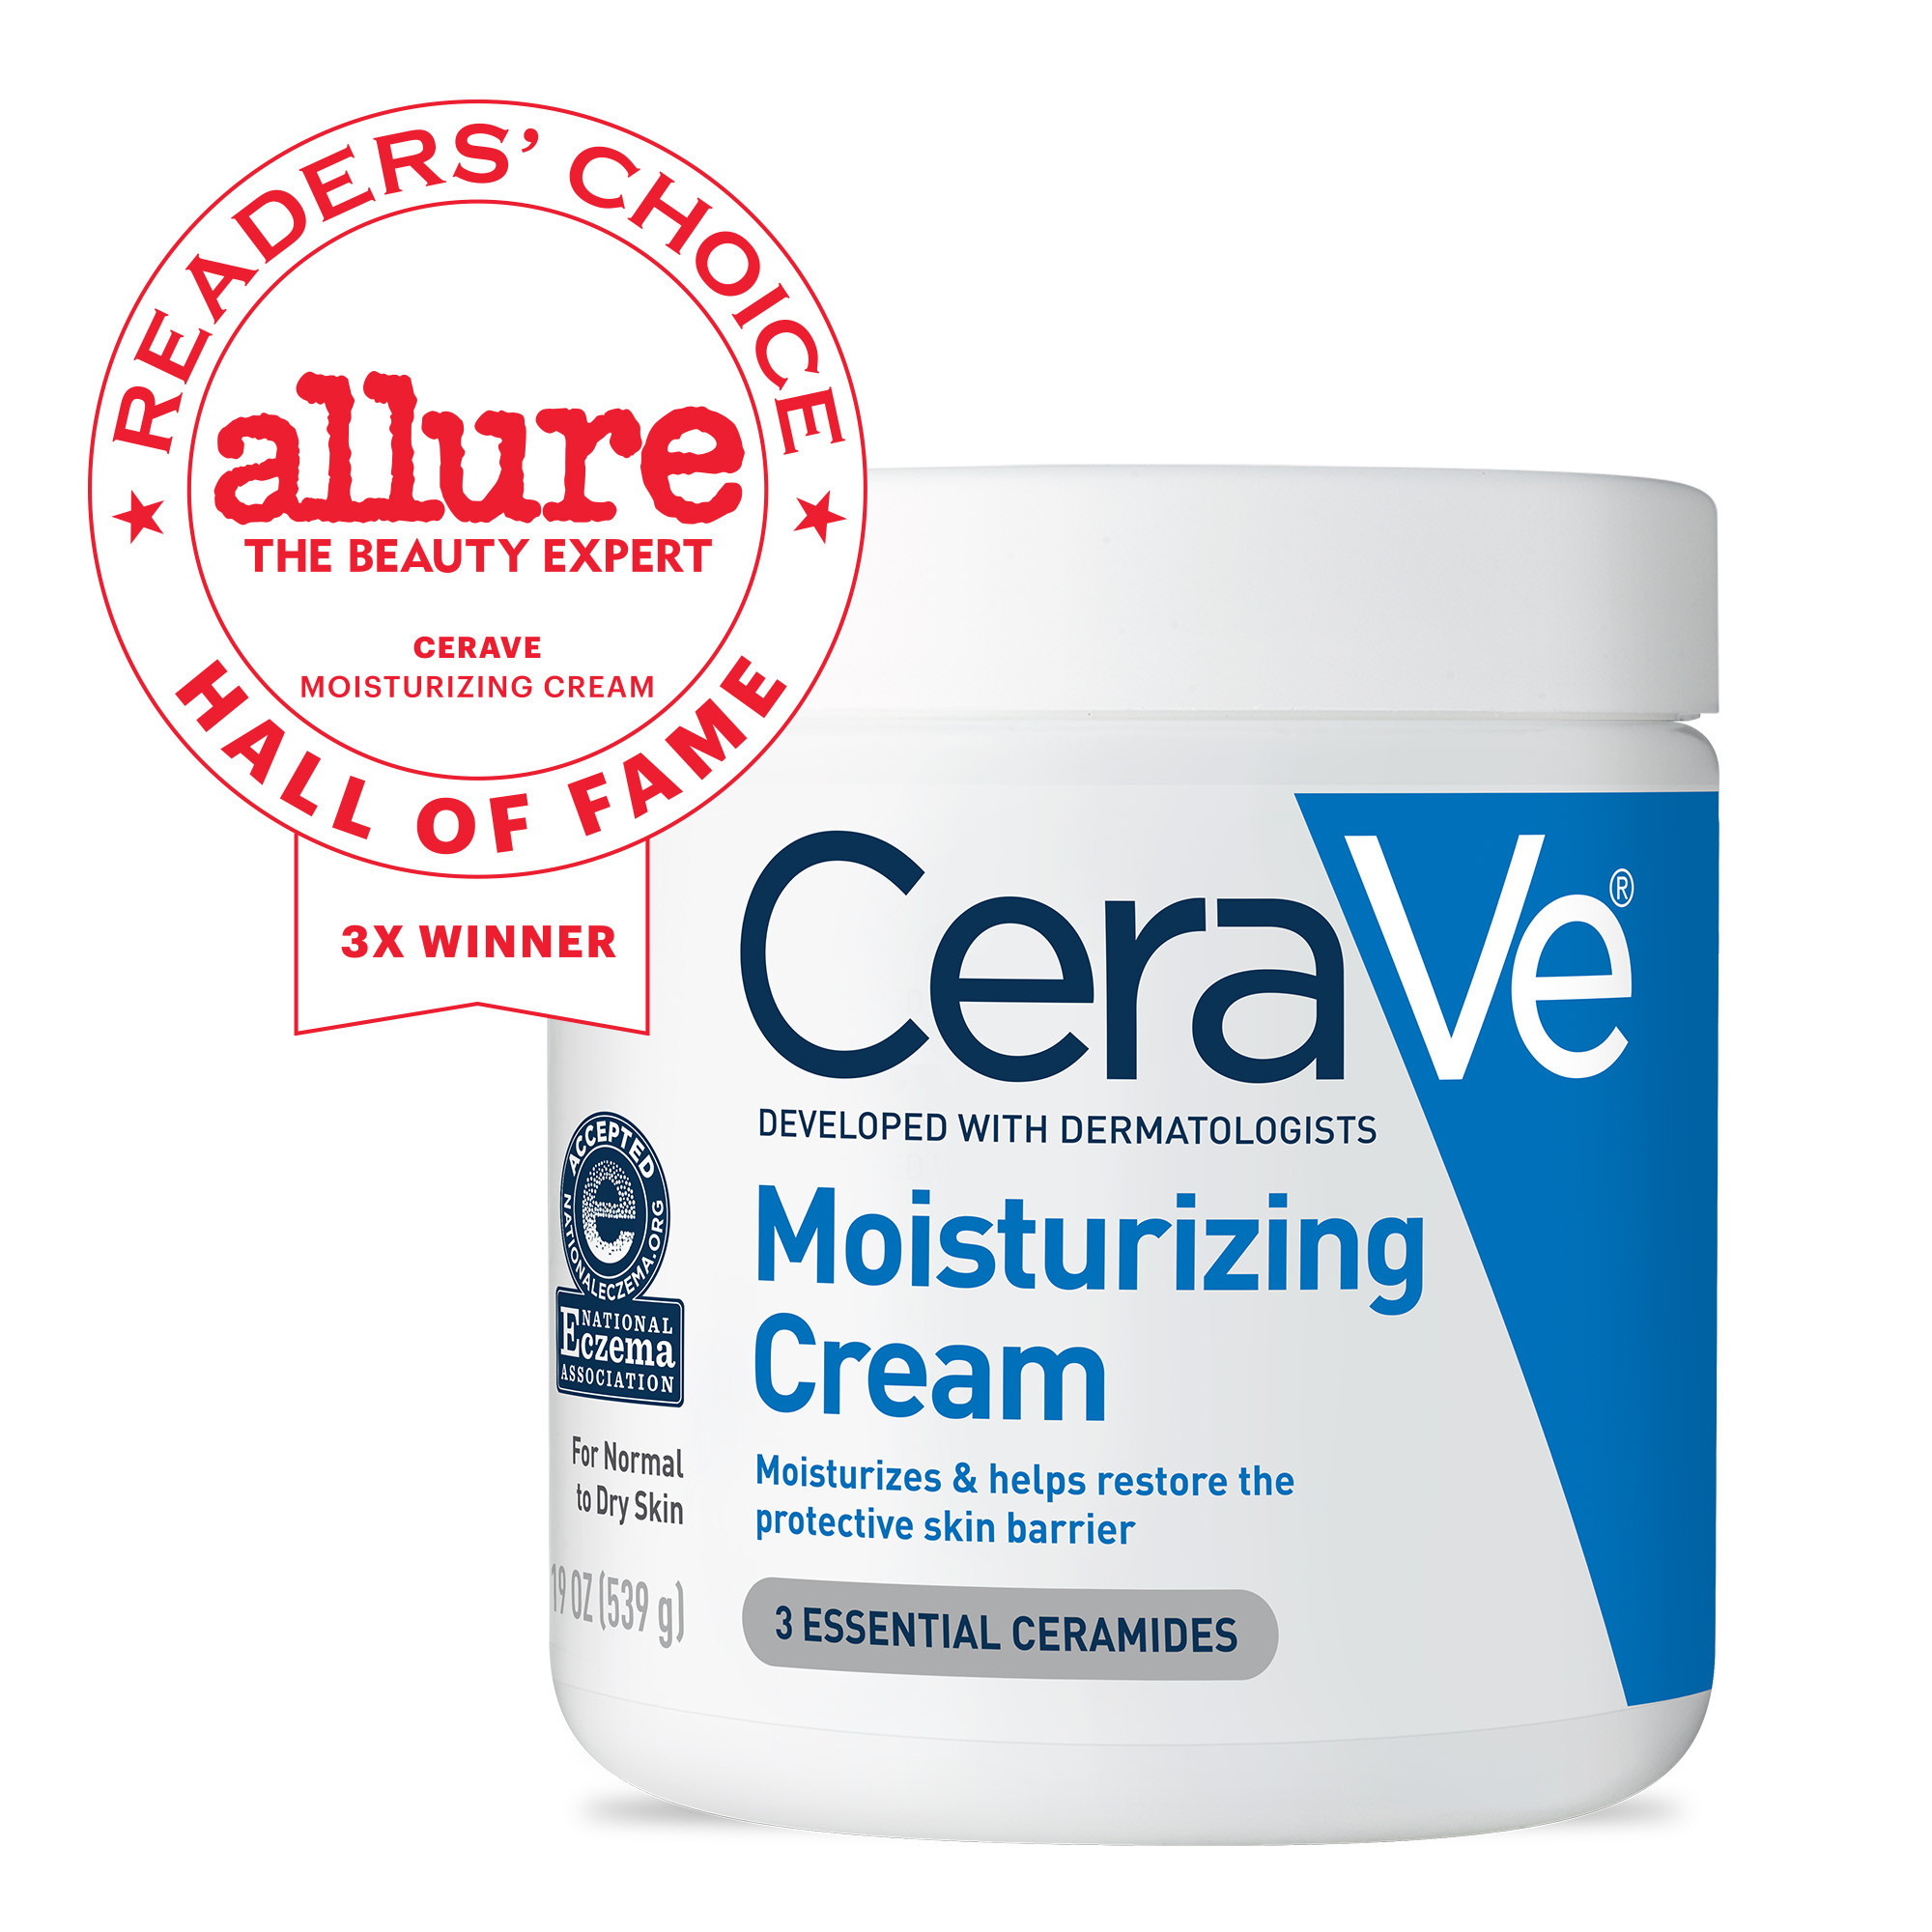 CeraVe Moisturizing Cream, Face & Body Moisturizer for Normal to Very Dry Skin, 16 oz - image 12 of 14